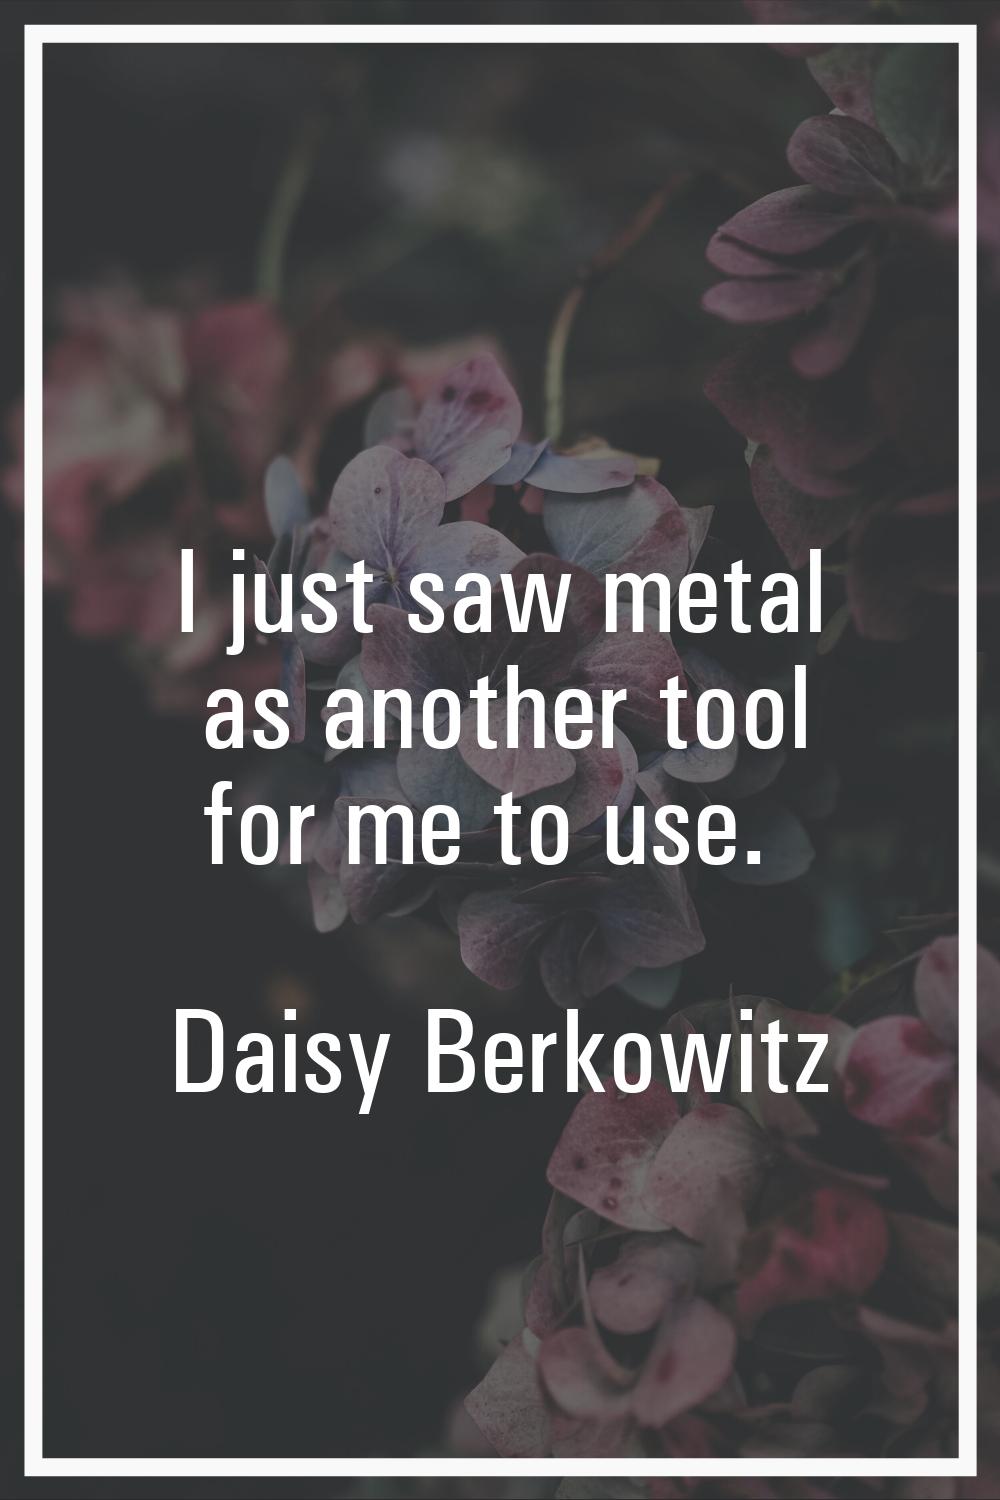 I just saw metal as another tool for me to use.